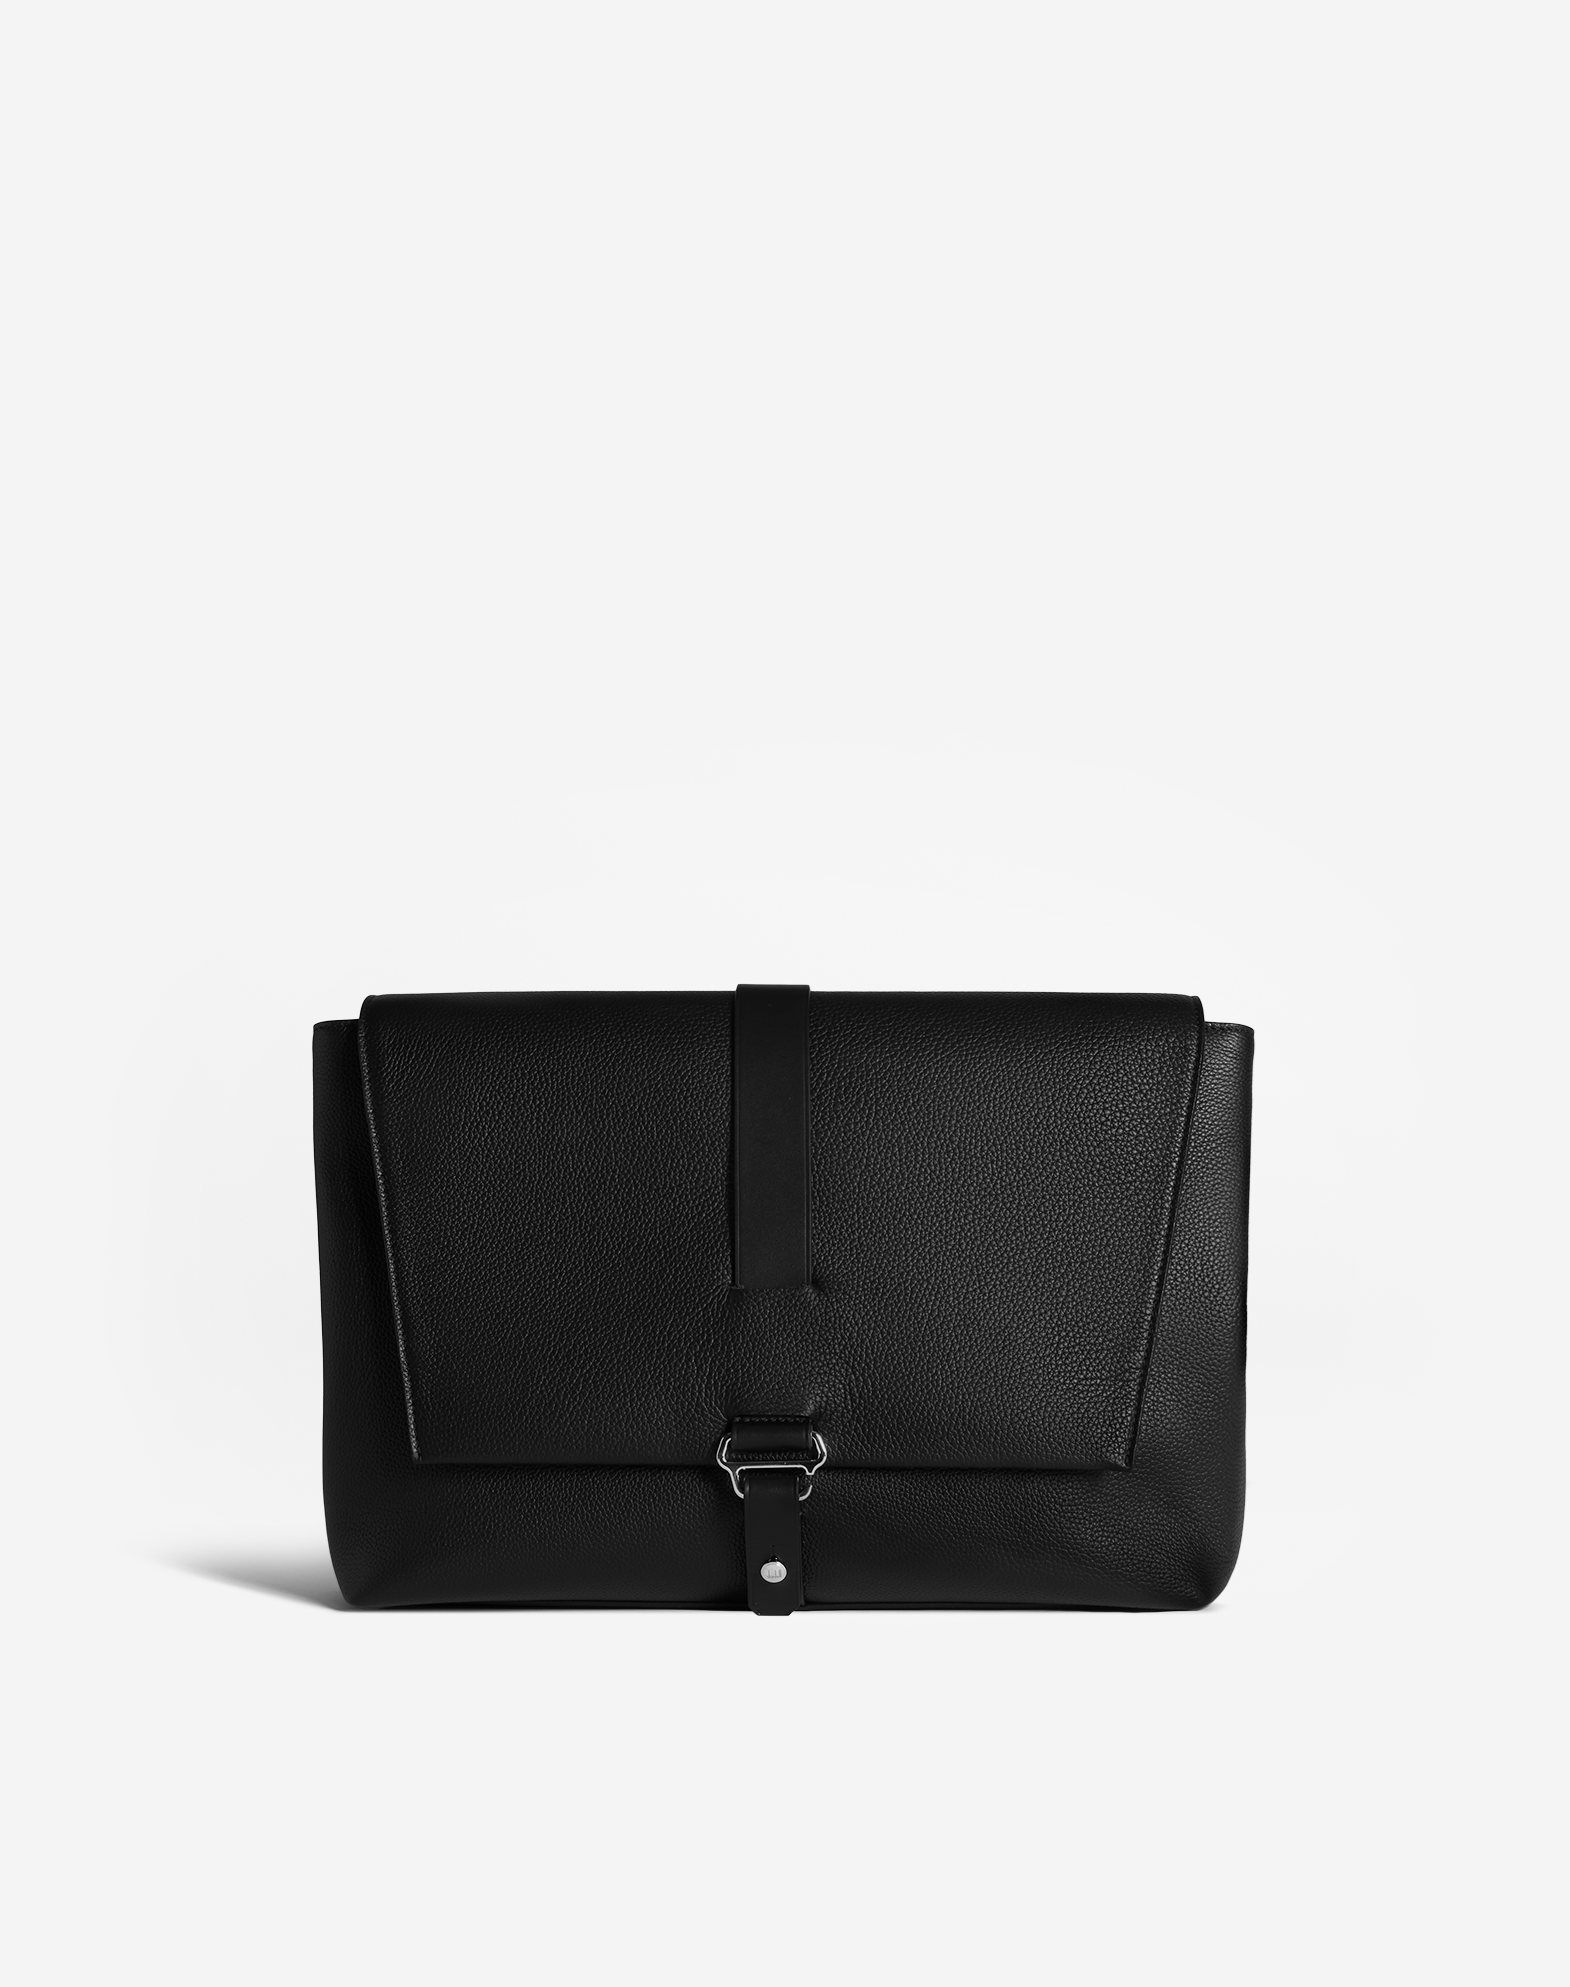 Dunhill 1893 Harness Flap Messenger In Black